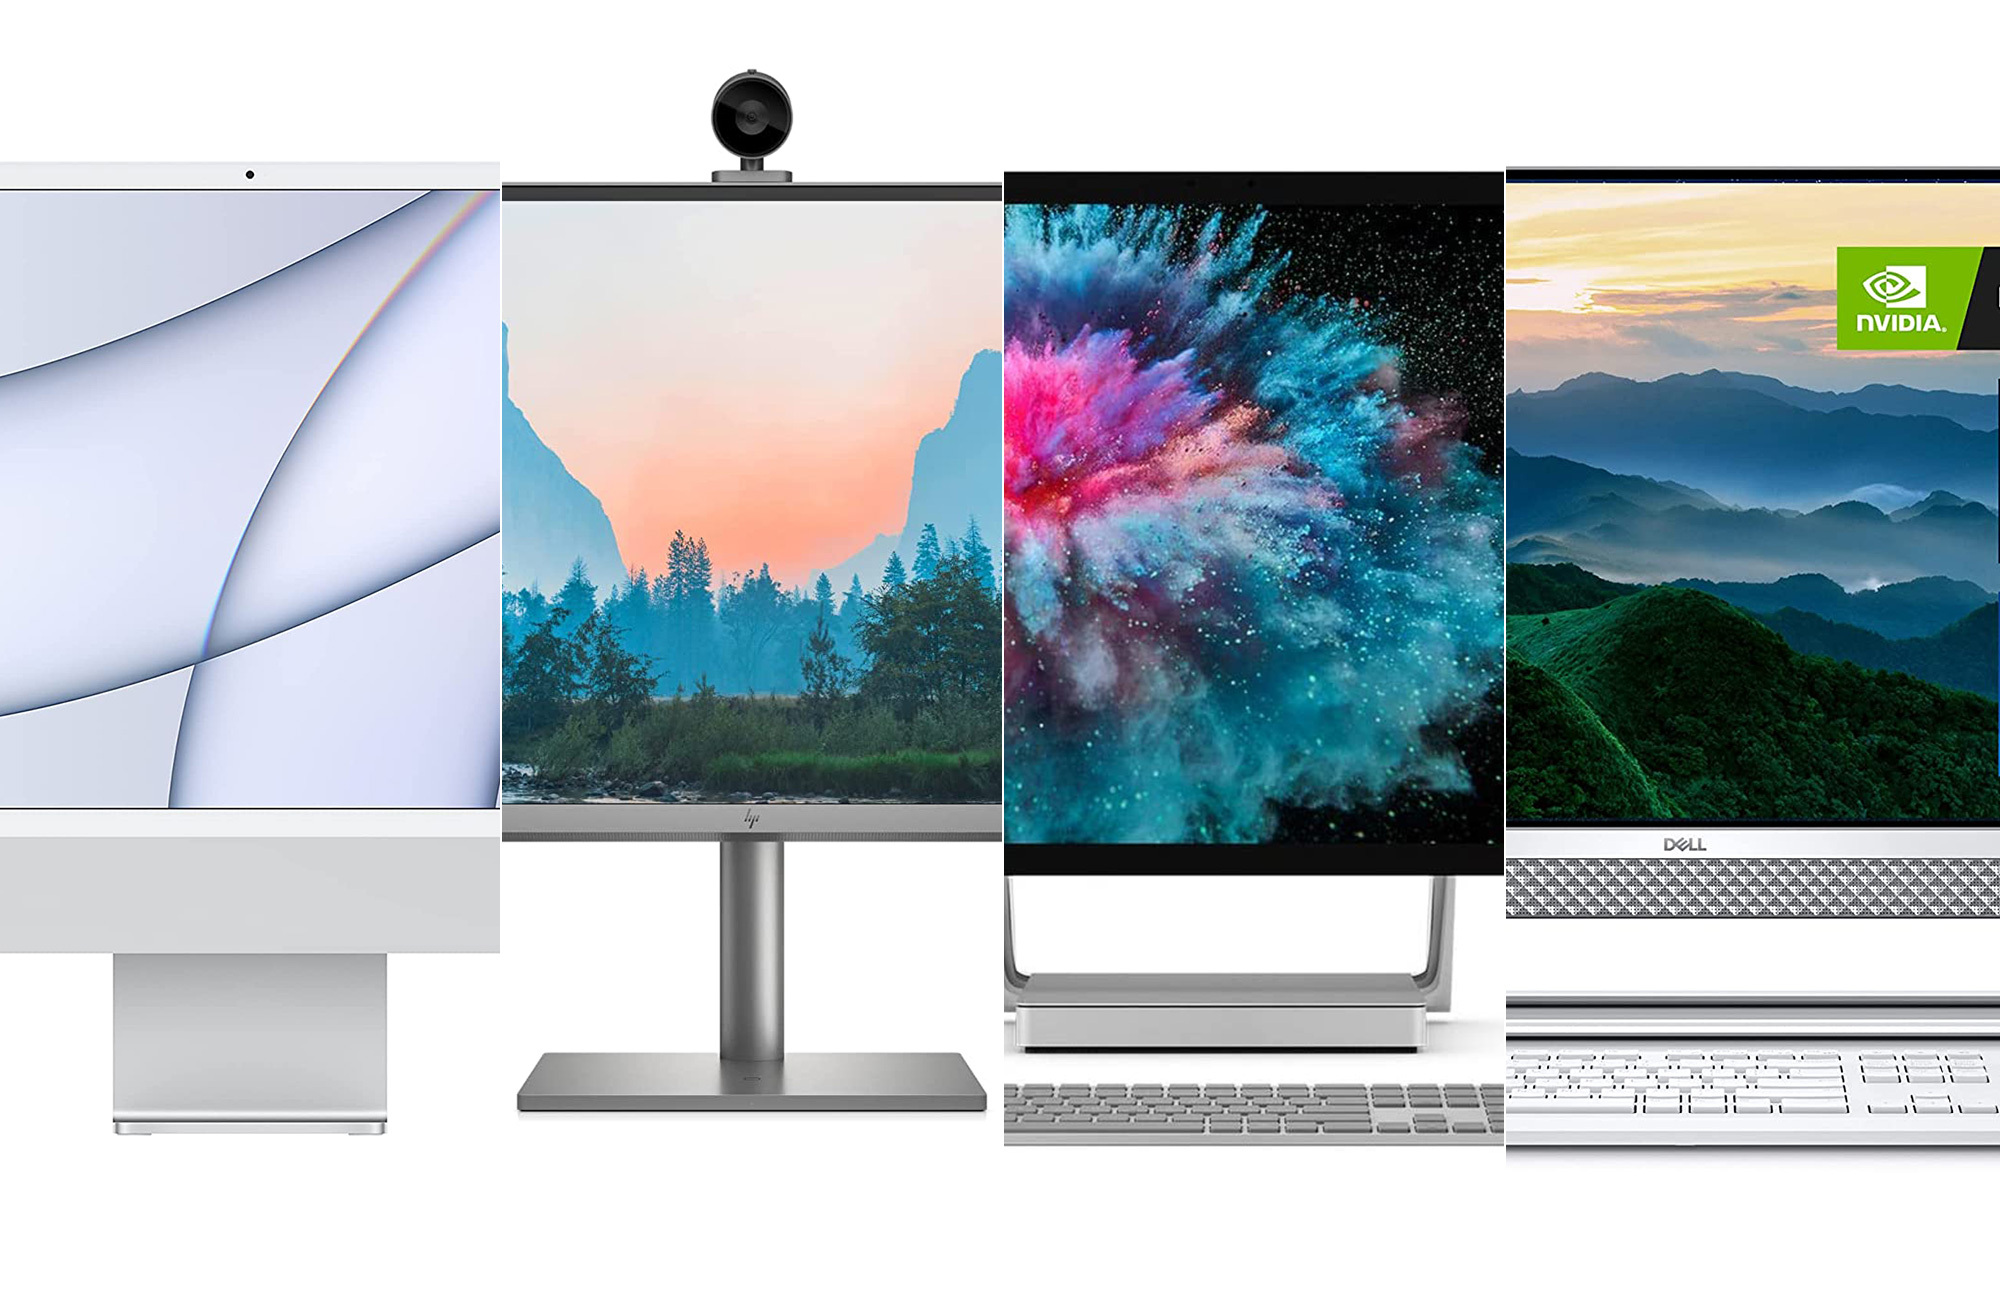 The Best All-in-One Computers for 2023